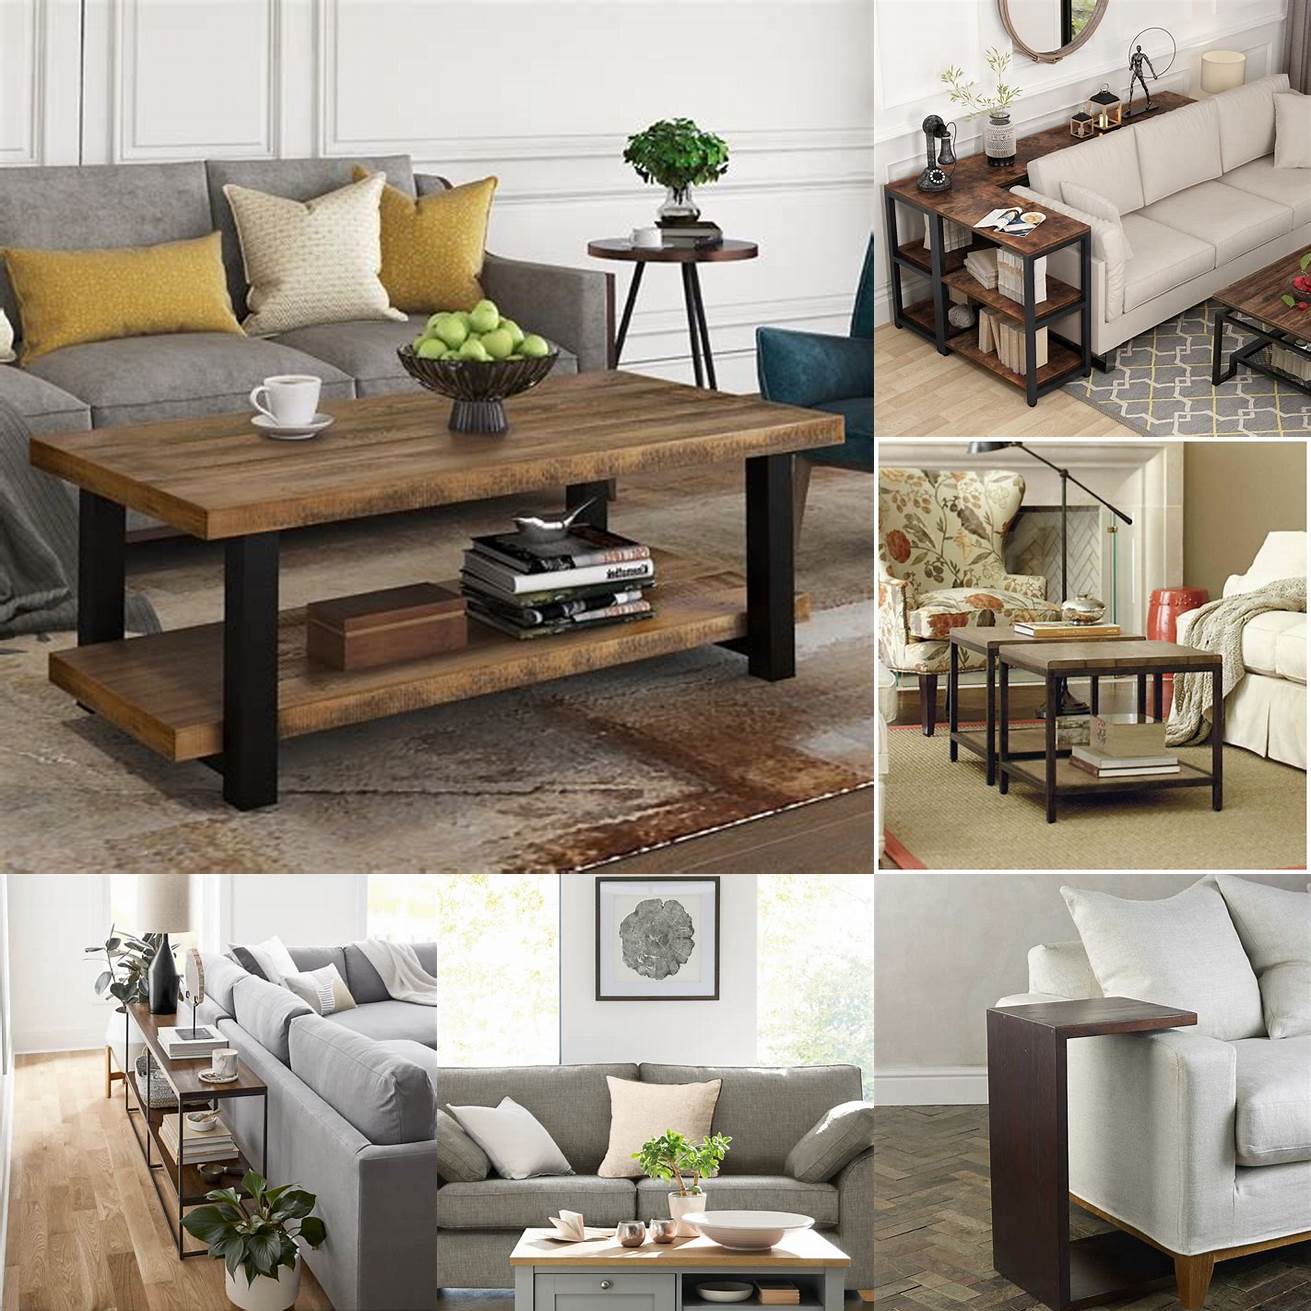 Pair it with a coffee table or side table A high back sofa can look great when paired with a coffee table or side table that complements its style and material You can choose a table with a similar color shape or material as your sofa to create a cohesive and harmonious look